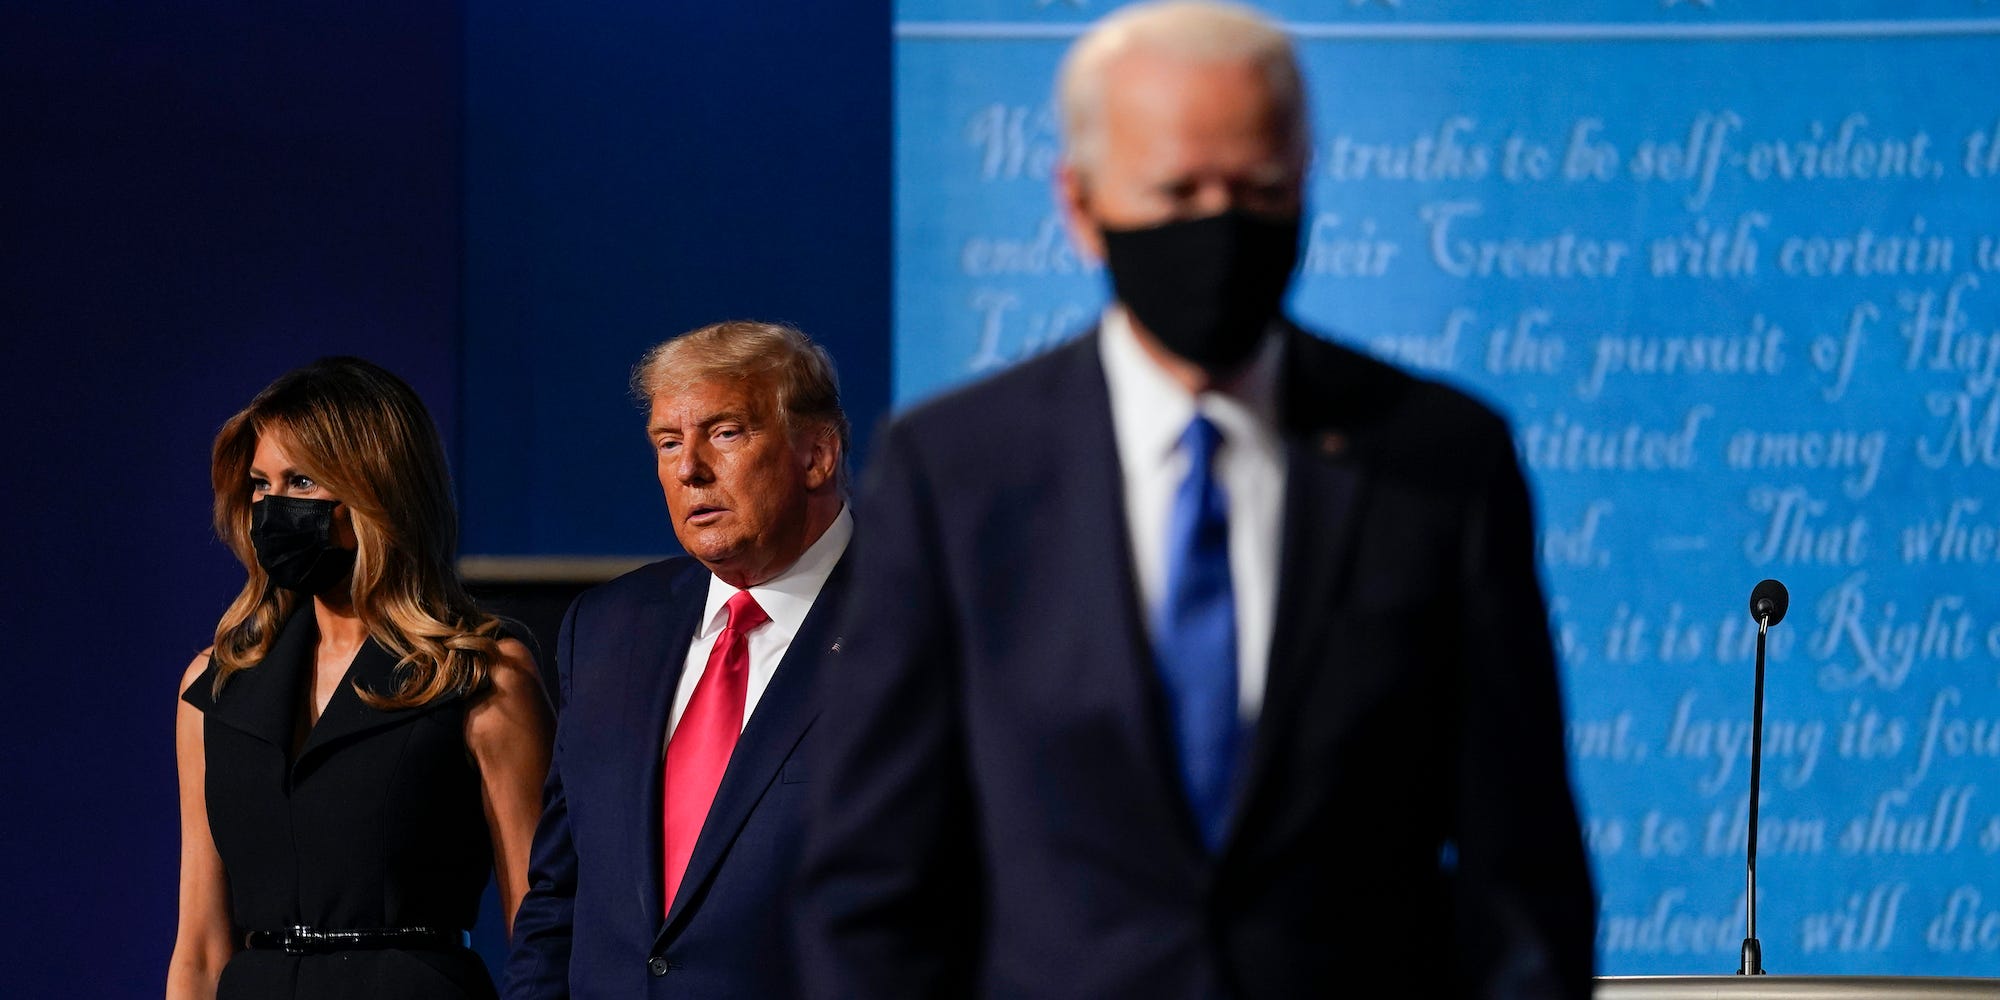 fFirst lady Melania Trump, left, and President Donald Trump, center, remain on stage as Democratic presidential candidate former Vice President Joe Biden, right, walk away at the conclusion of the second and final presidential debate Thursday, Oct. 22, 2020, at Belmont University in Nashville, Tenn.